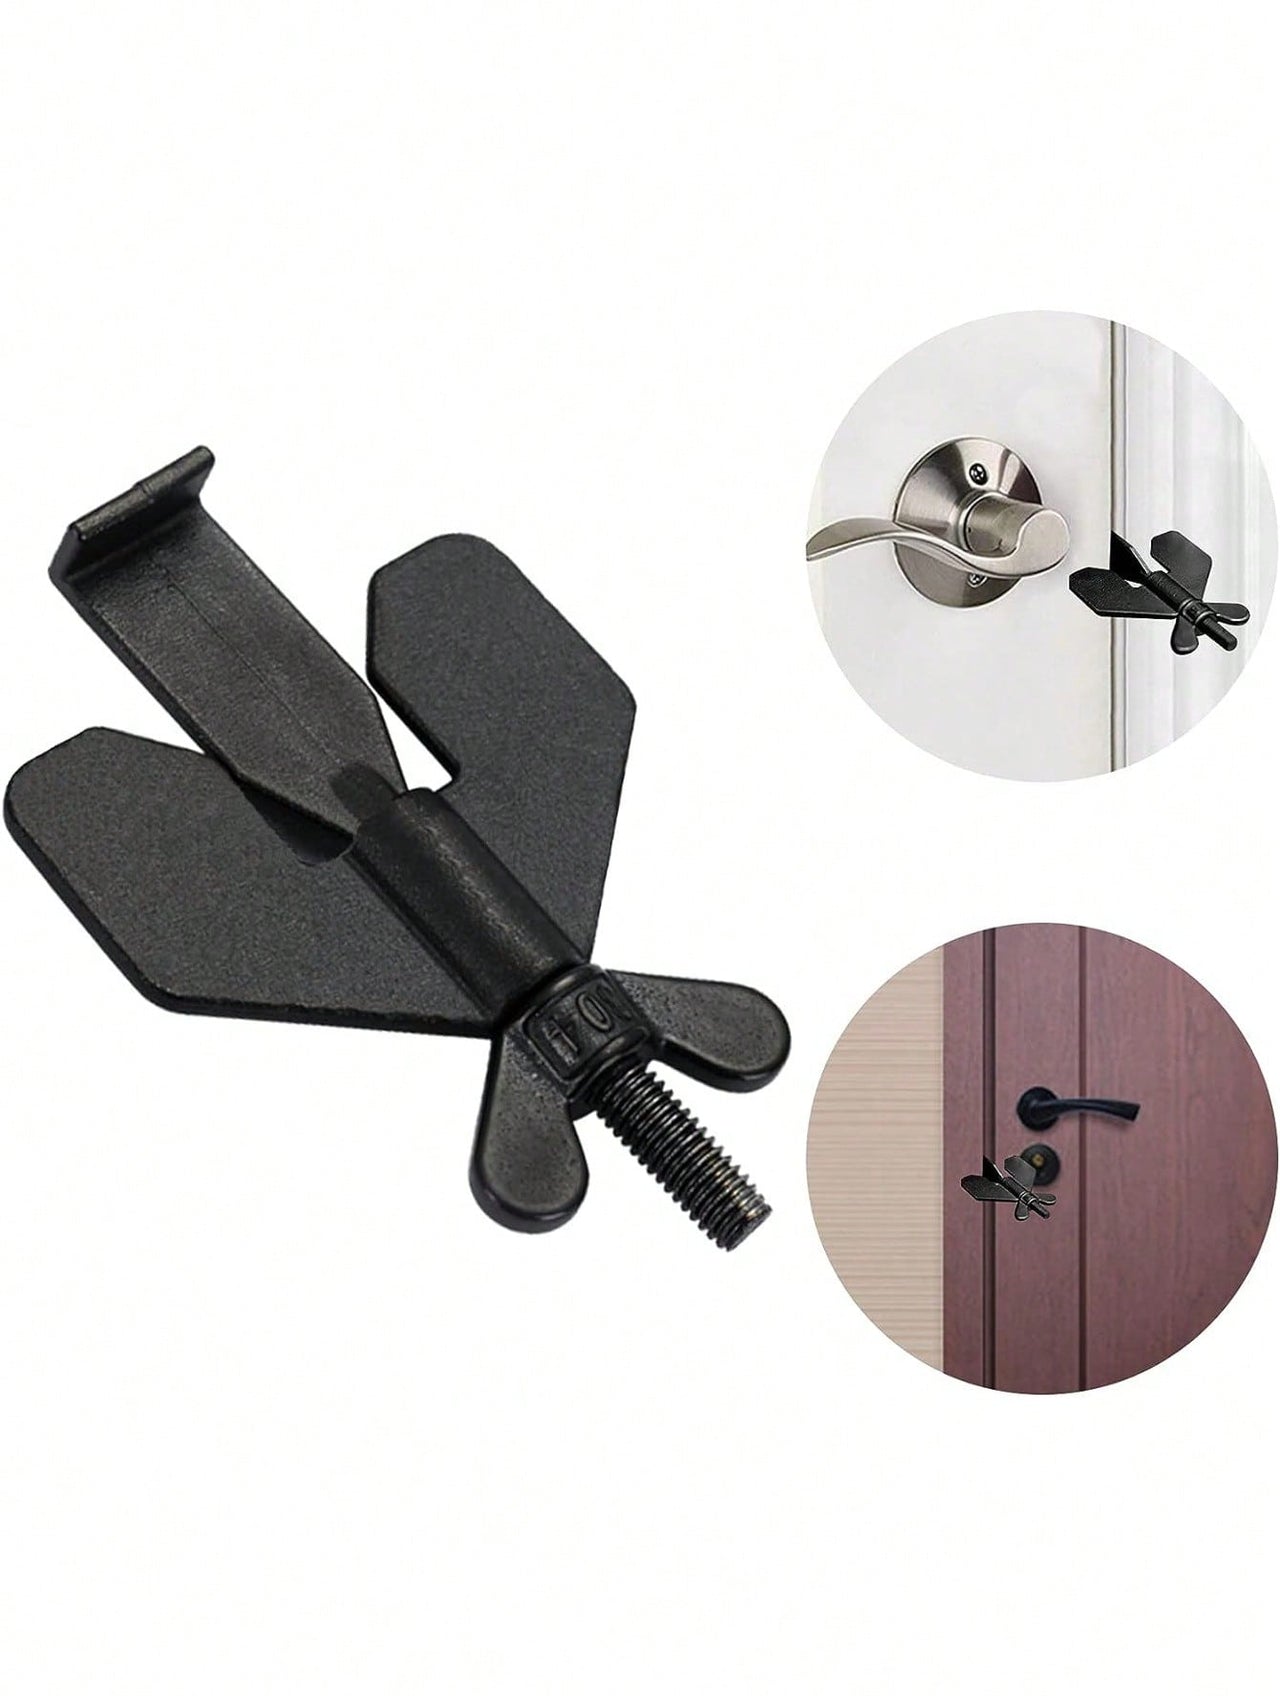 1PC Portable Door Locks Home Security Door Lockers Travel Lock Locks Provide Extra Security and Privacy Ideal for Travel Hotels Home Apartments Colleges,Secure Your Home & Travel with This Upgraded Adjustable Portable Door Lock!